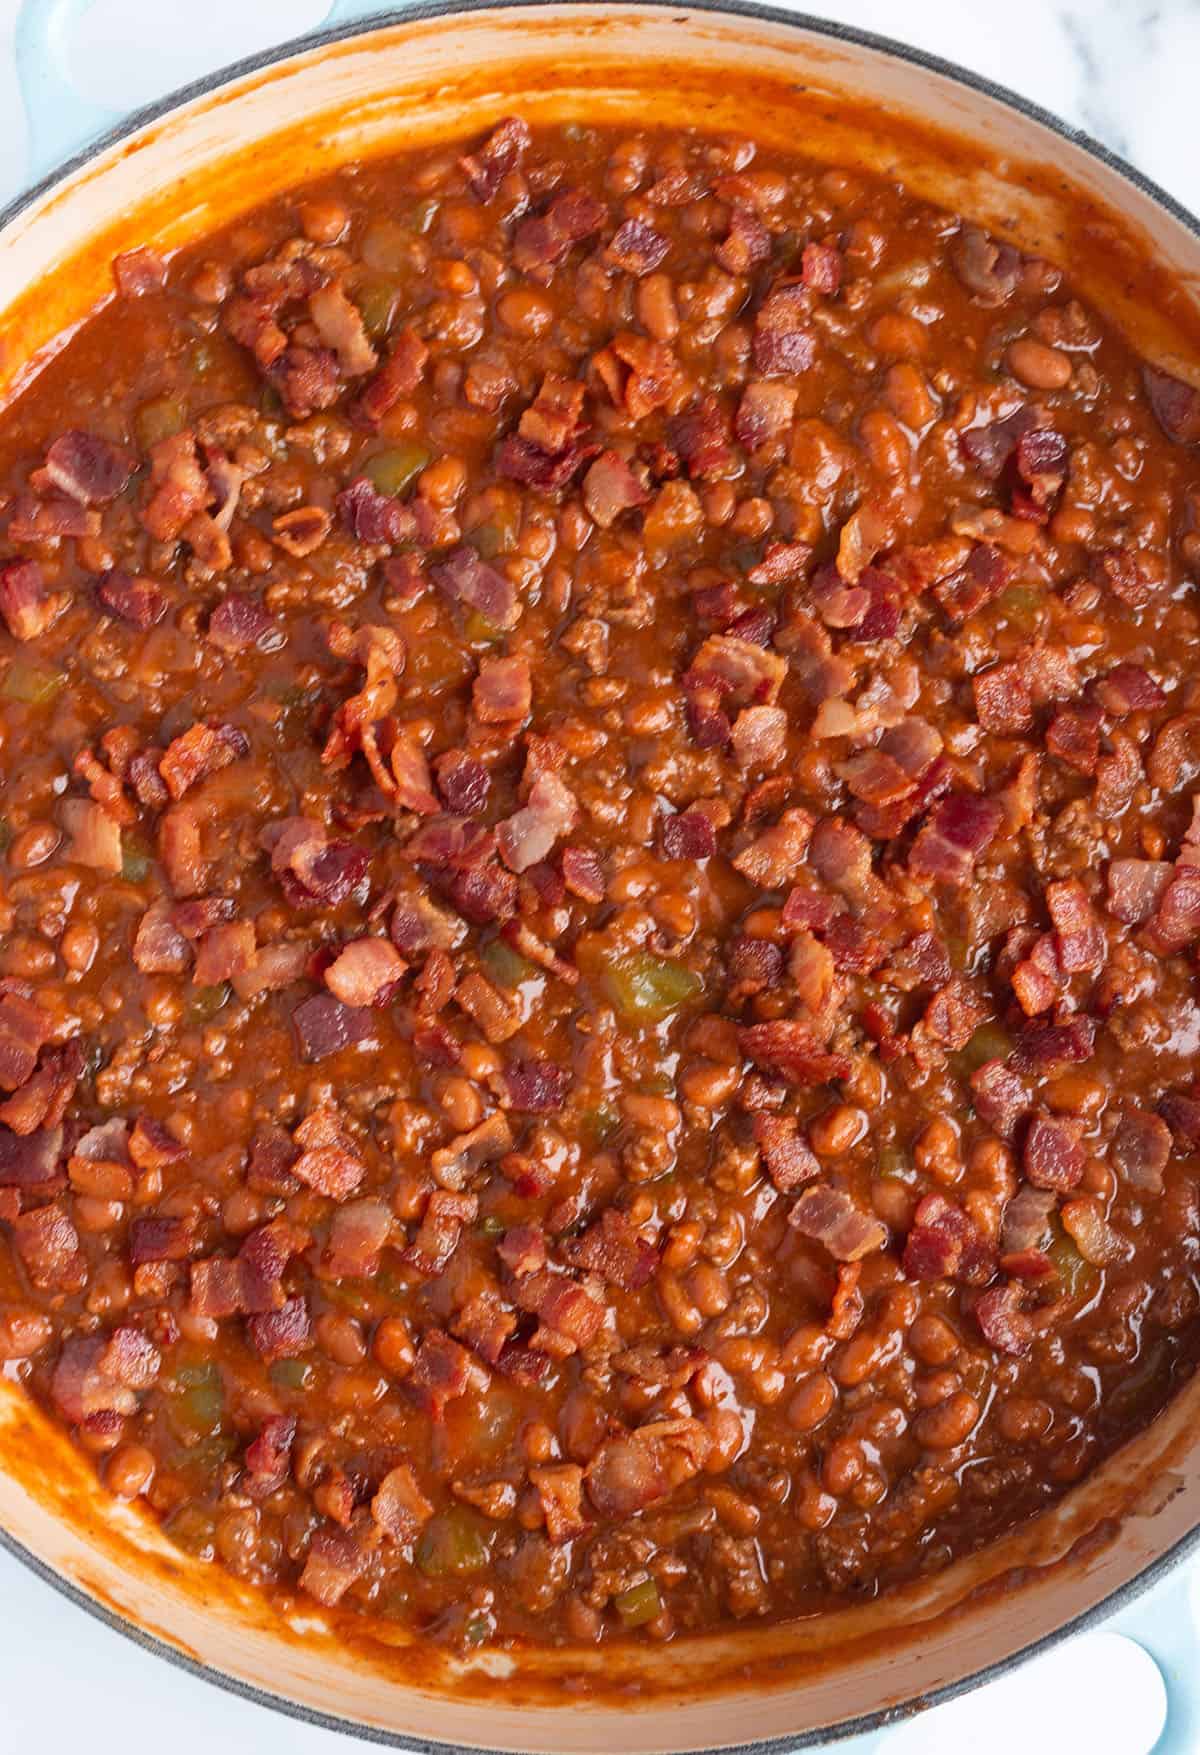 A large skillet with baked beans and ground beef dish.